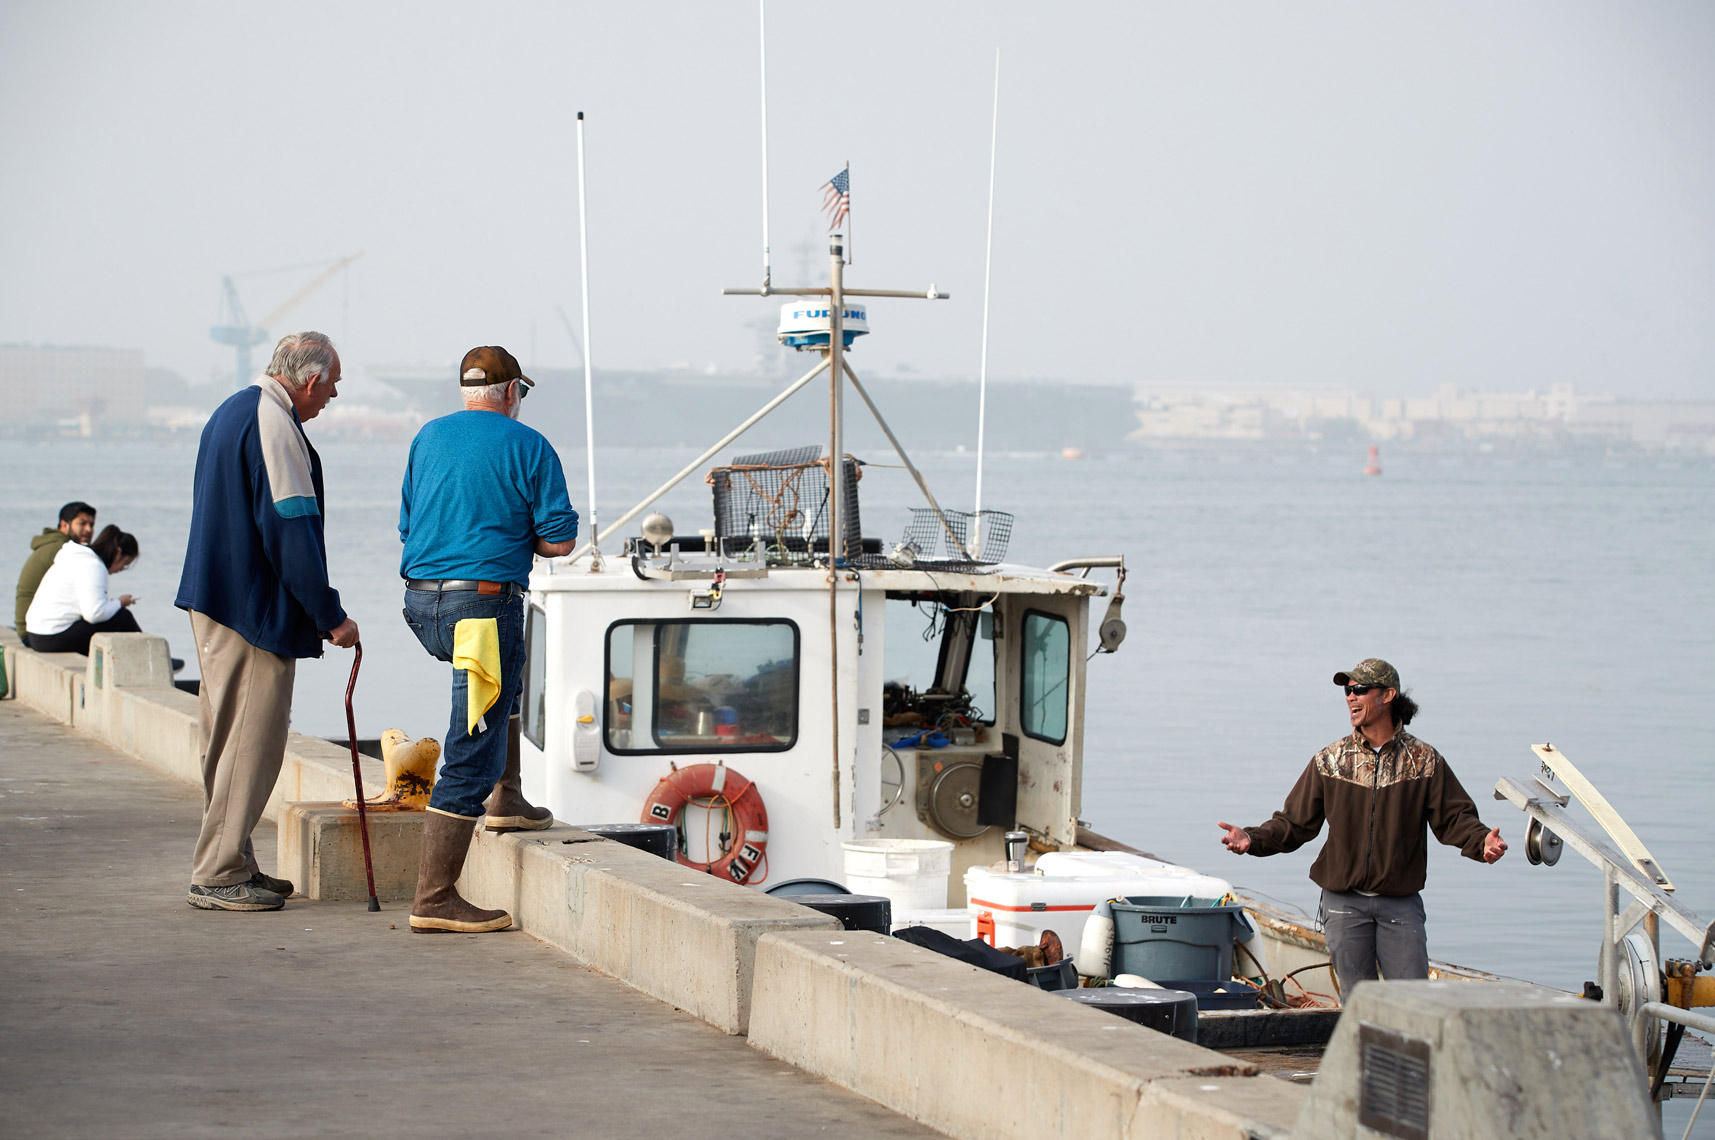 Fishermen Talk After Dropping off Their Catch at Tuna Harbor